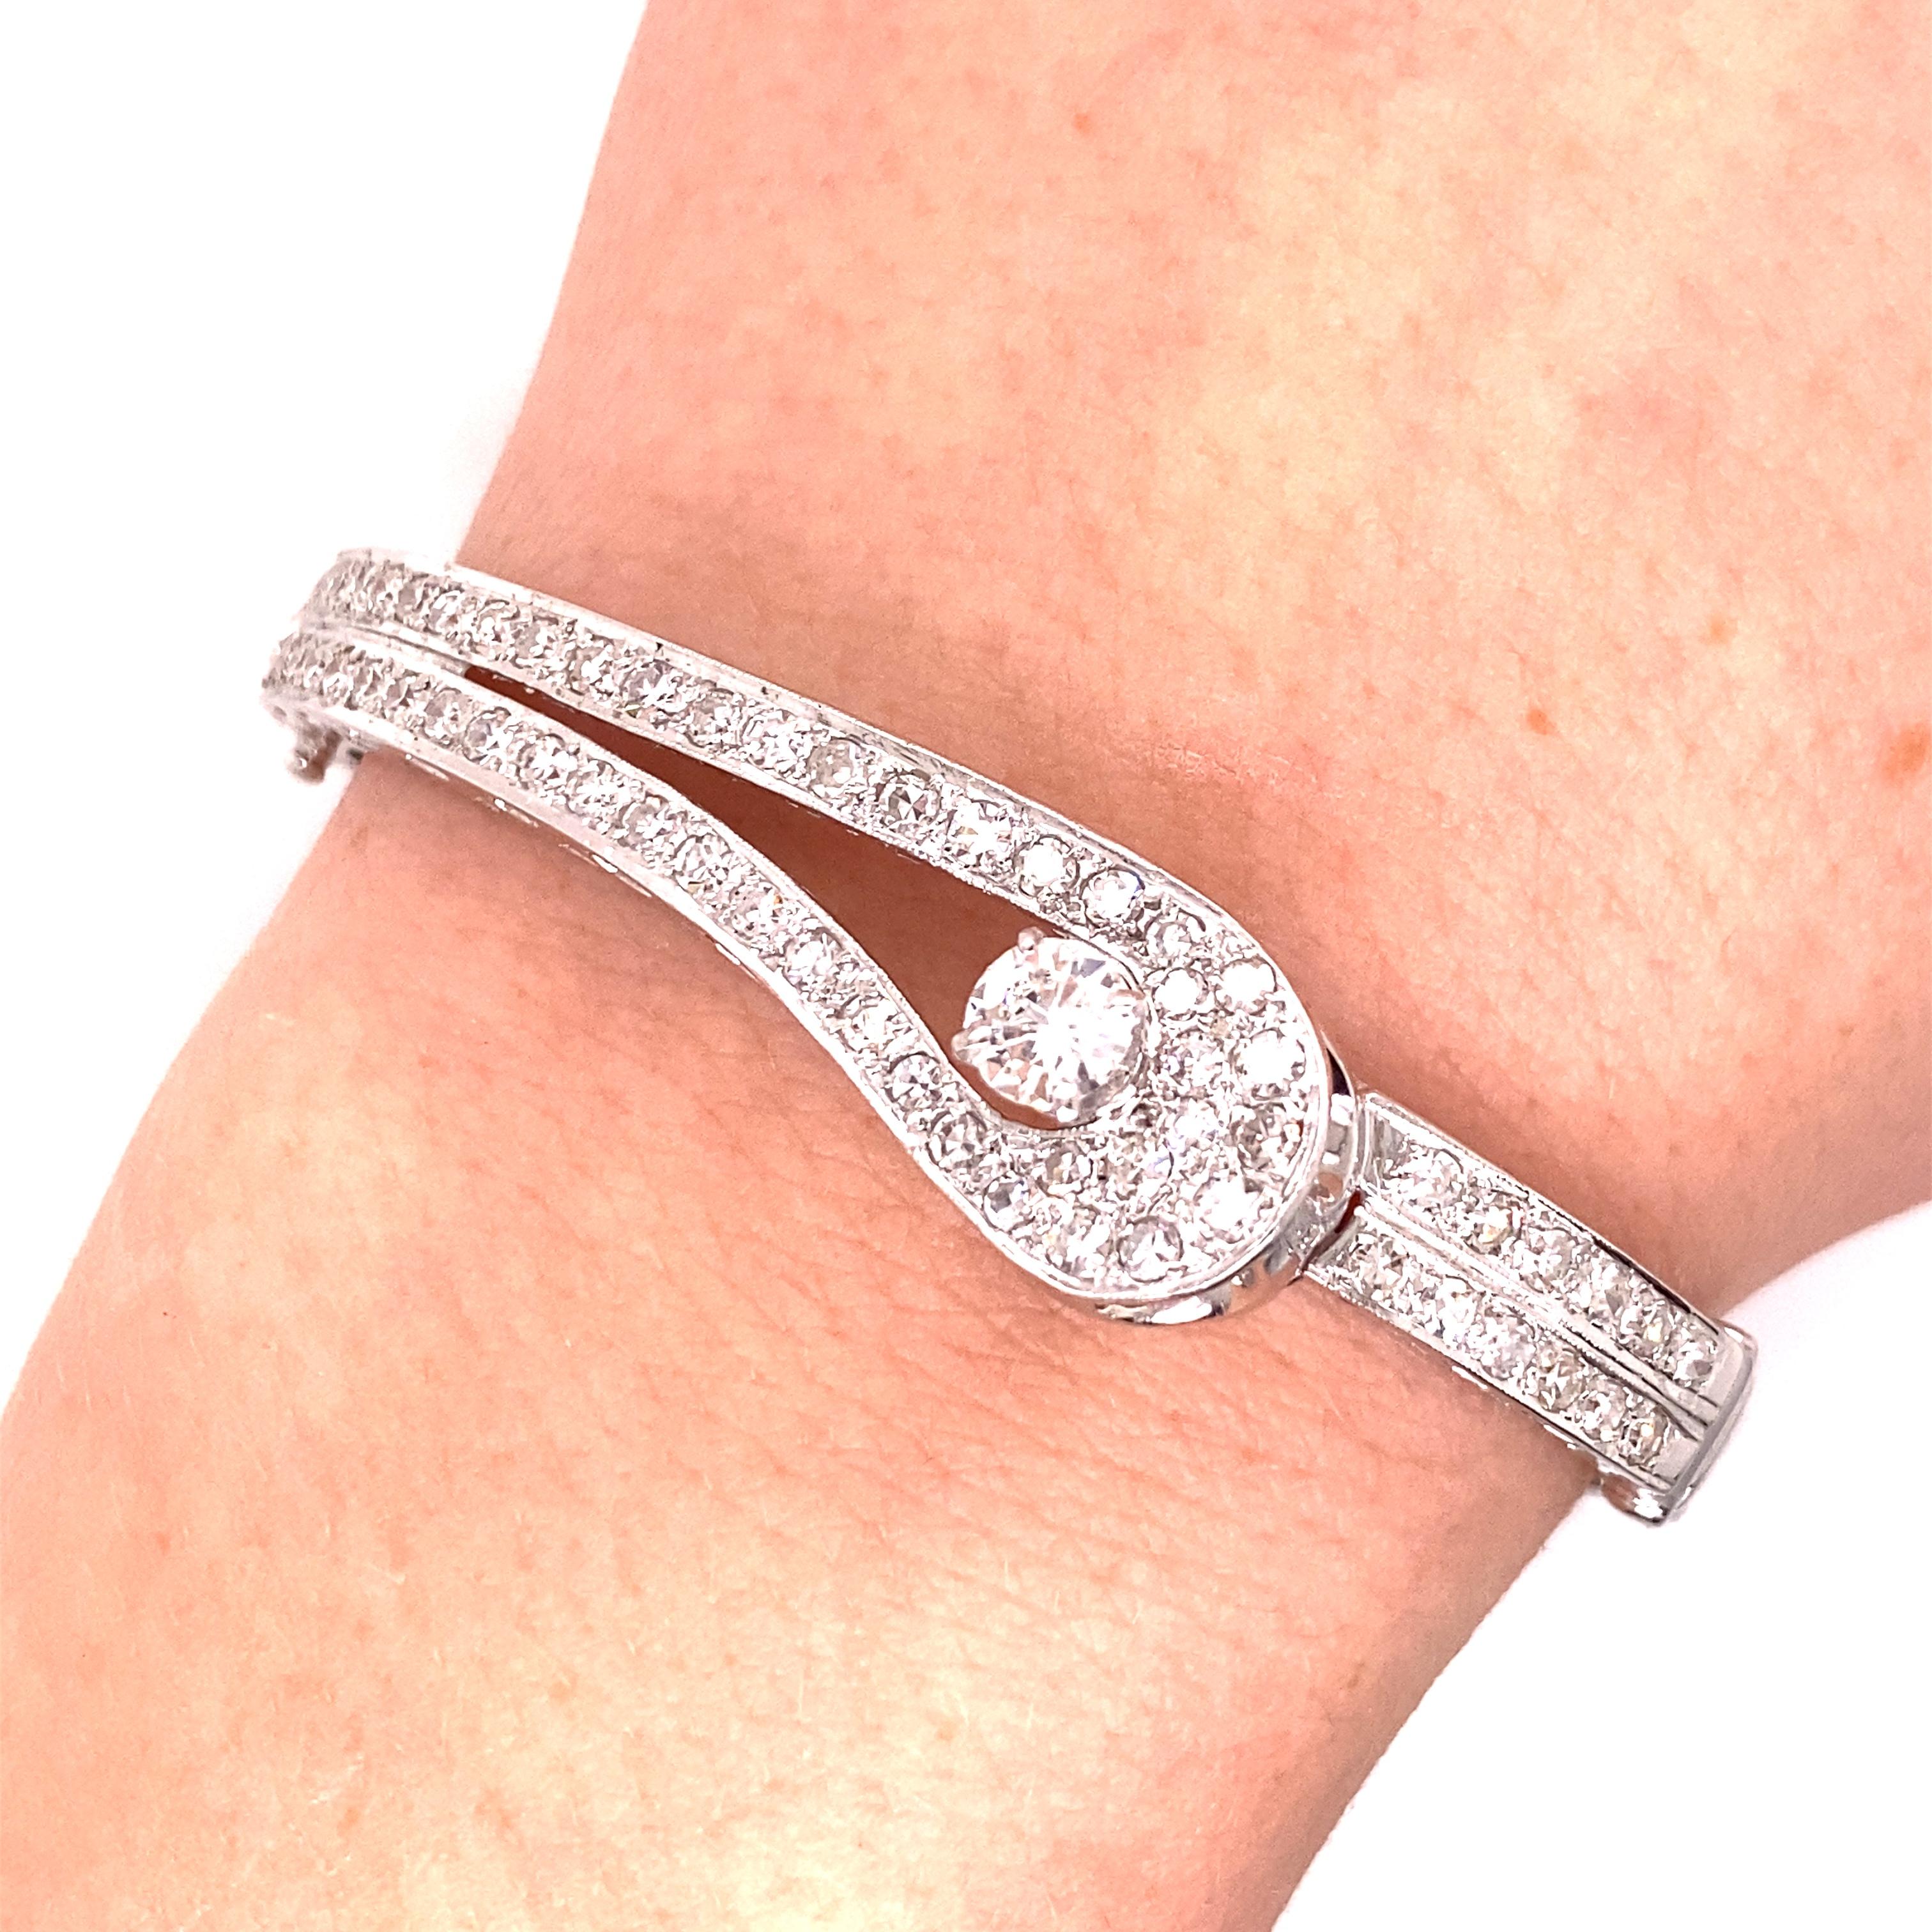 Vintage 1960's 14K White Gold Diamond Bangle - The bracelet contains one European cut diamond set in a 4 prong head which weighs about .45ct. The diamond quality is I color and VS2 clarity. There are 63 single cut diamonds pave set along the double